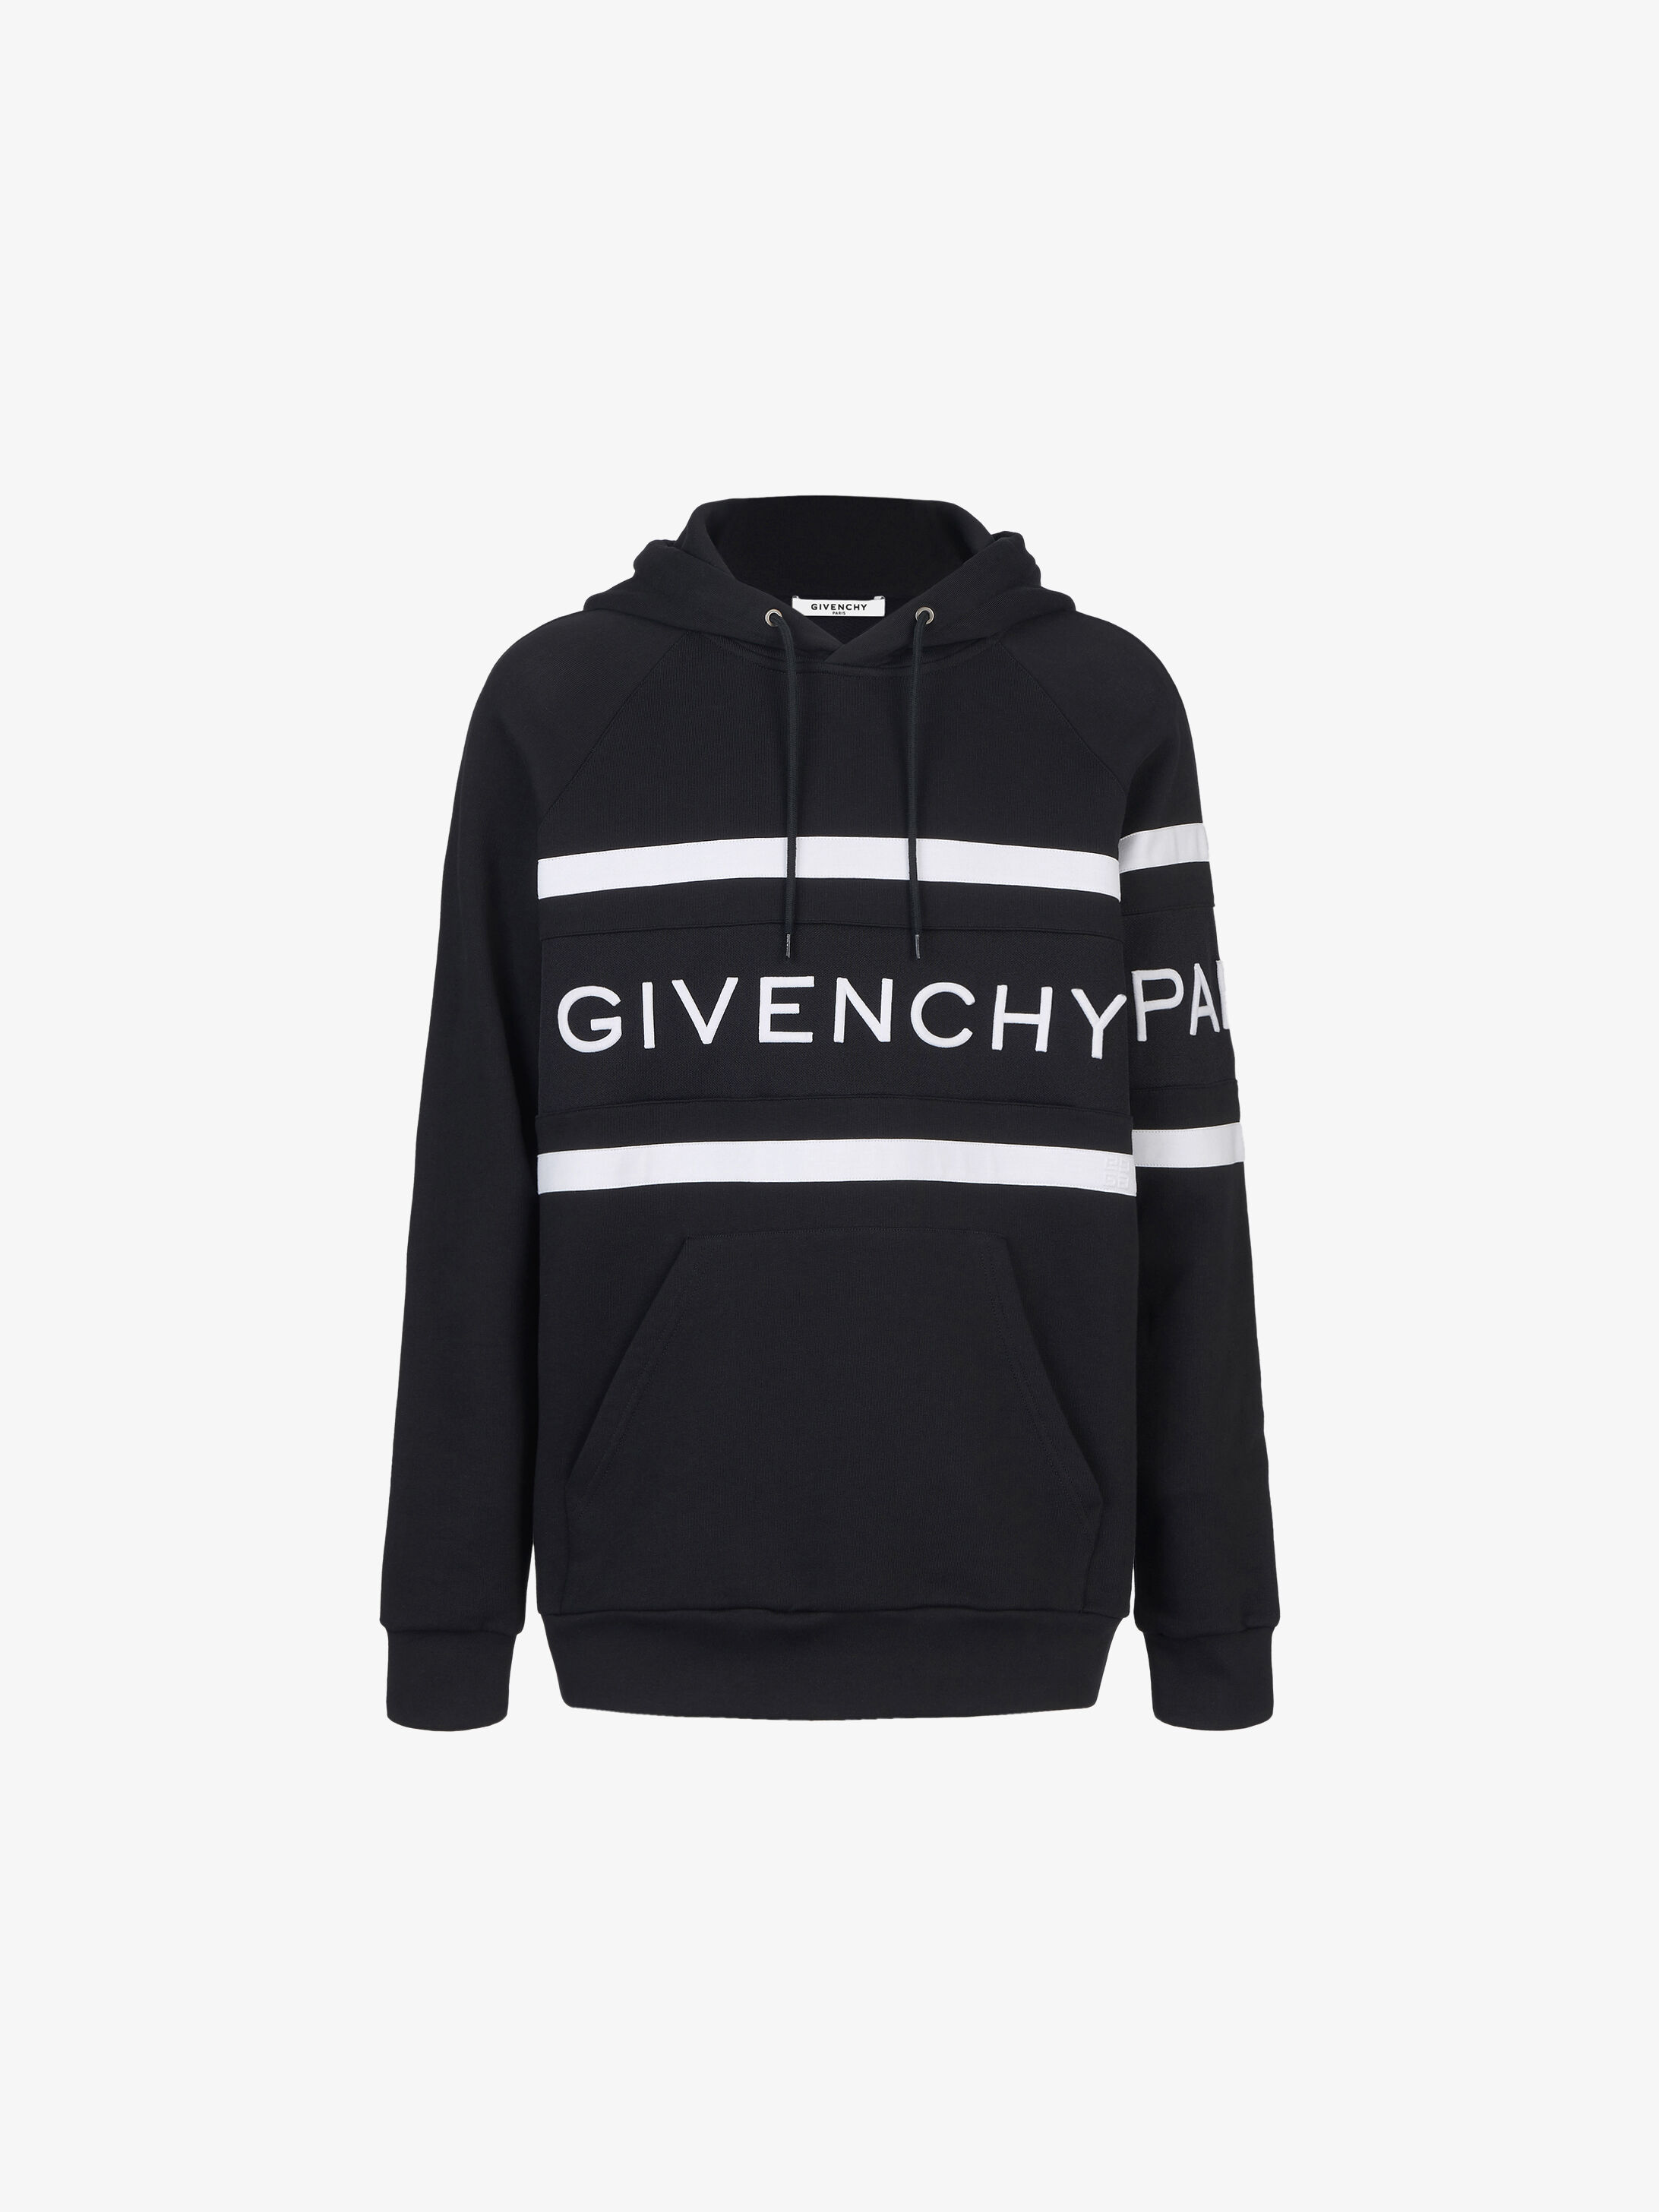 Givenchy Black And White Striped Hooded Sweatshirt - Rogue